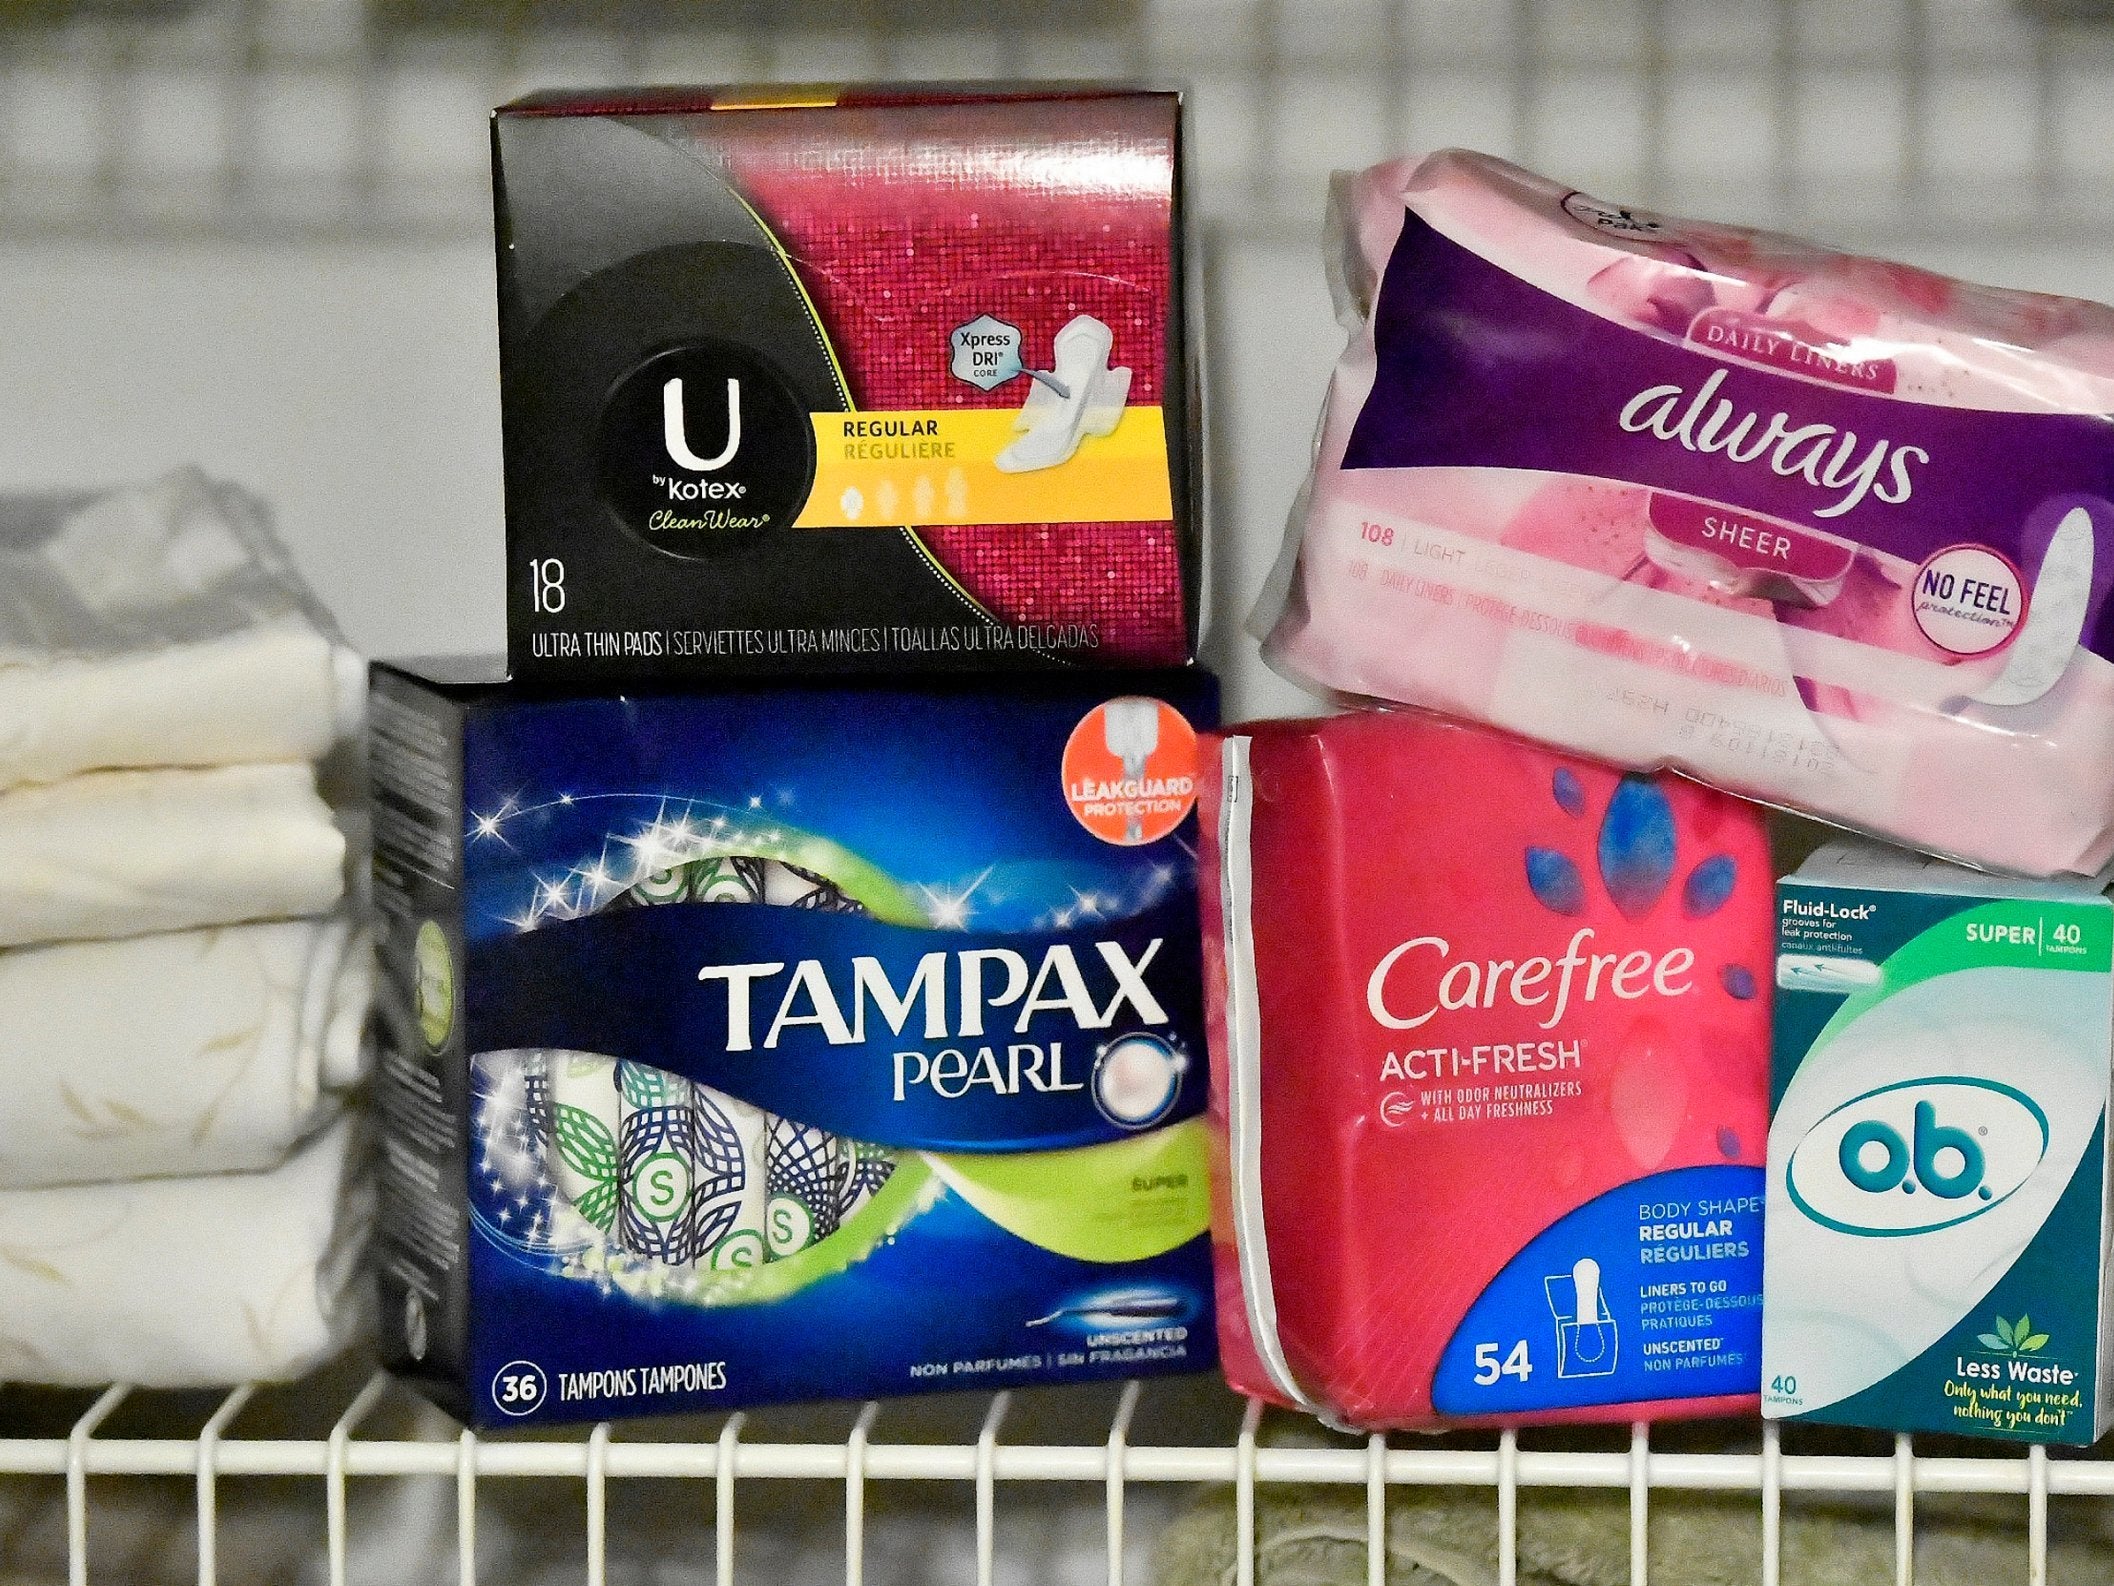 Grant will provide more than 141,000 female students with a range of sanitary products free of charge